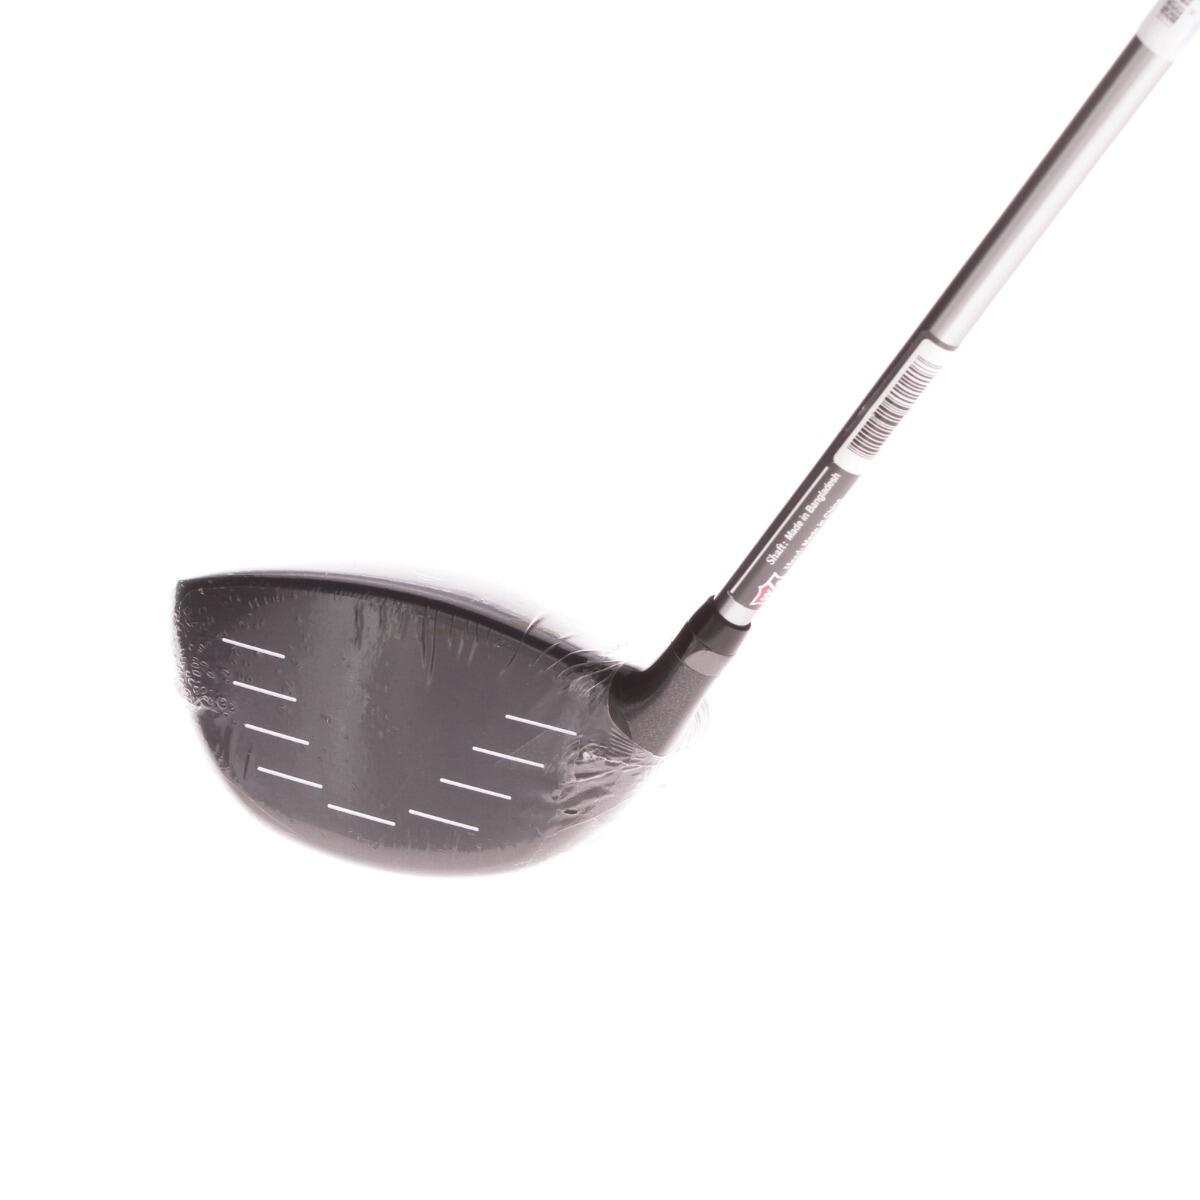 USED - Driver Wilson Staff Launch Pad HL Graphite Ladies Right Handed - GRADE B 4/7